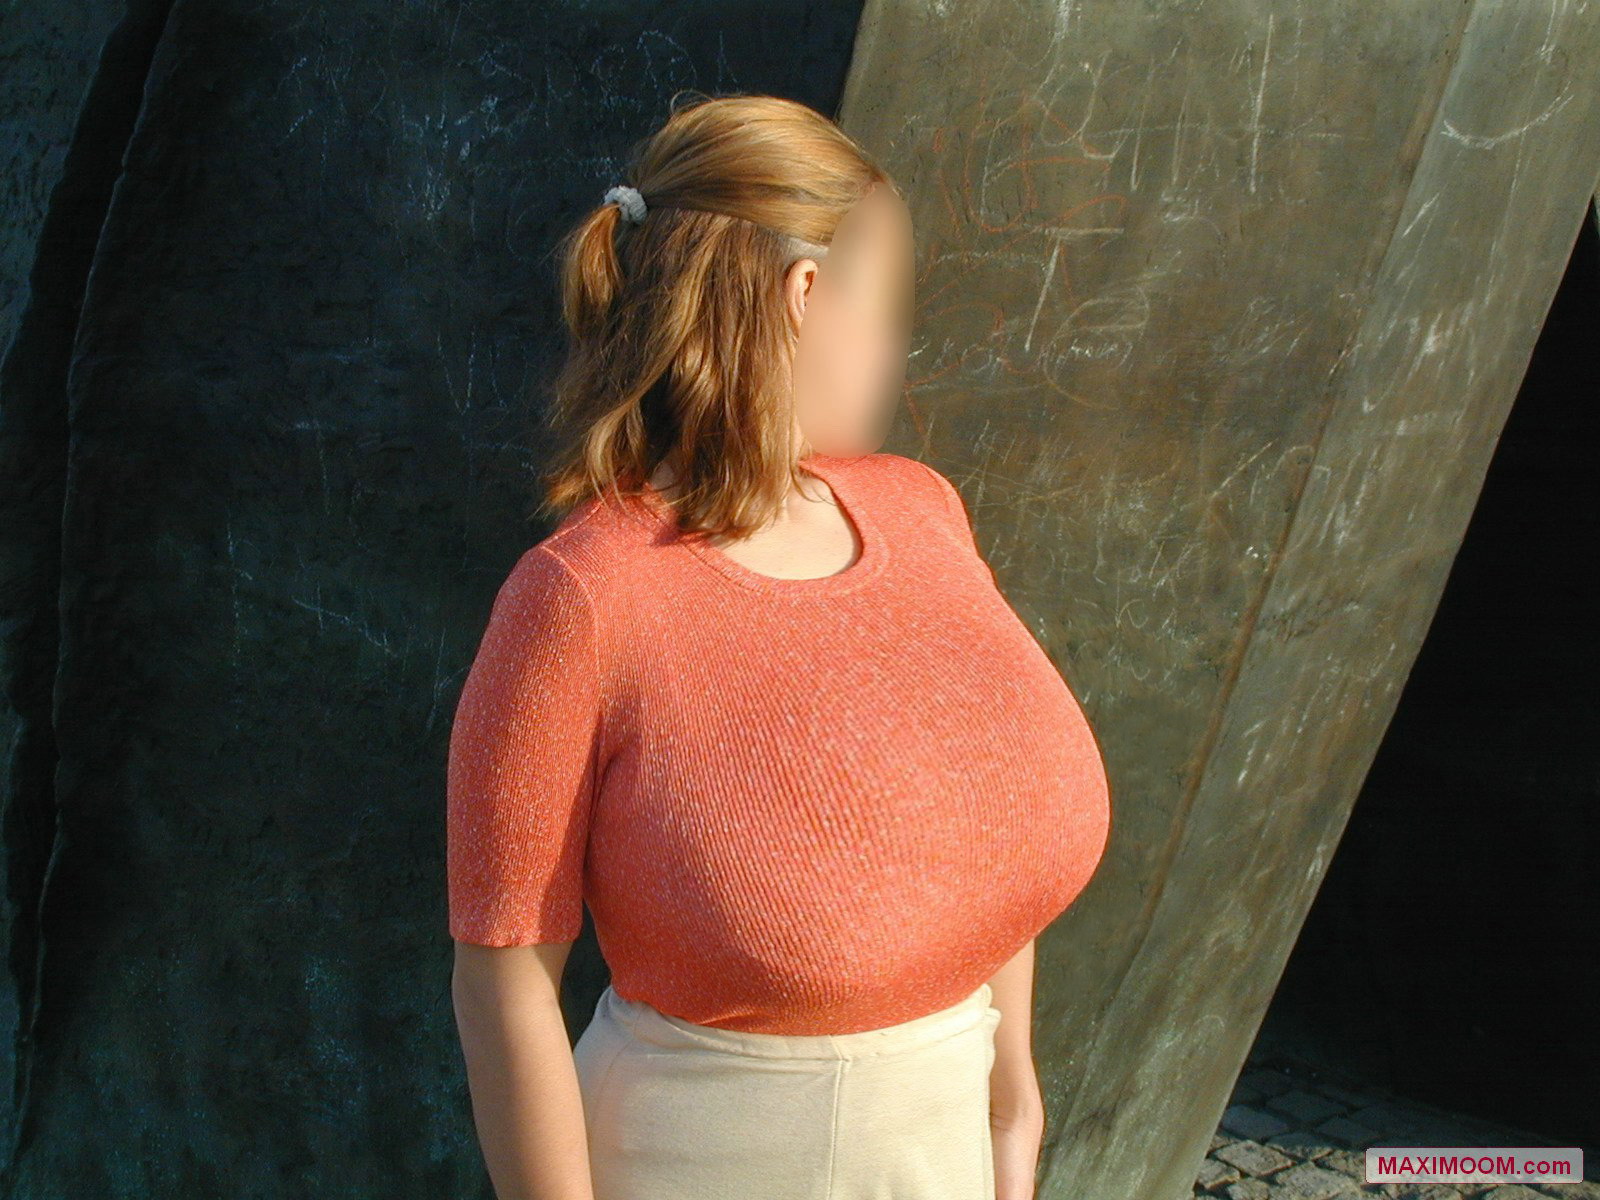 Bizarre Boob Proportions On A Quite Thin Girl